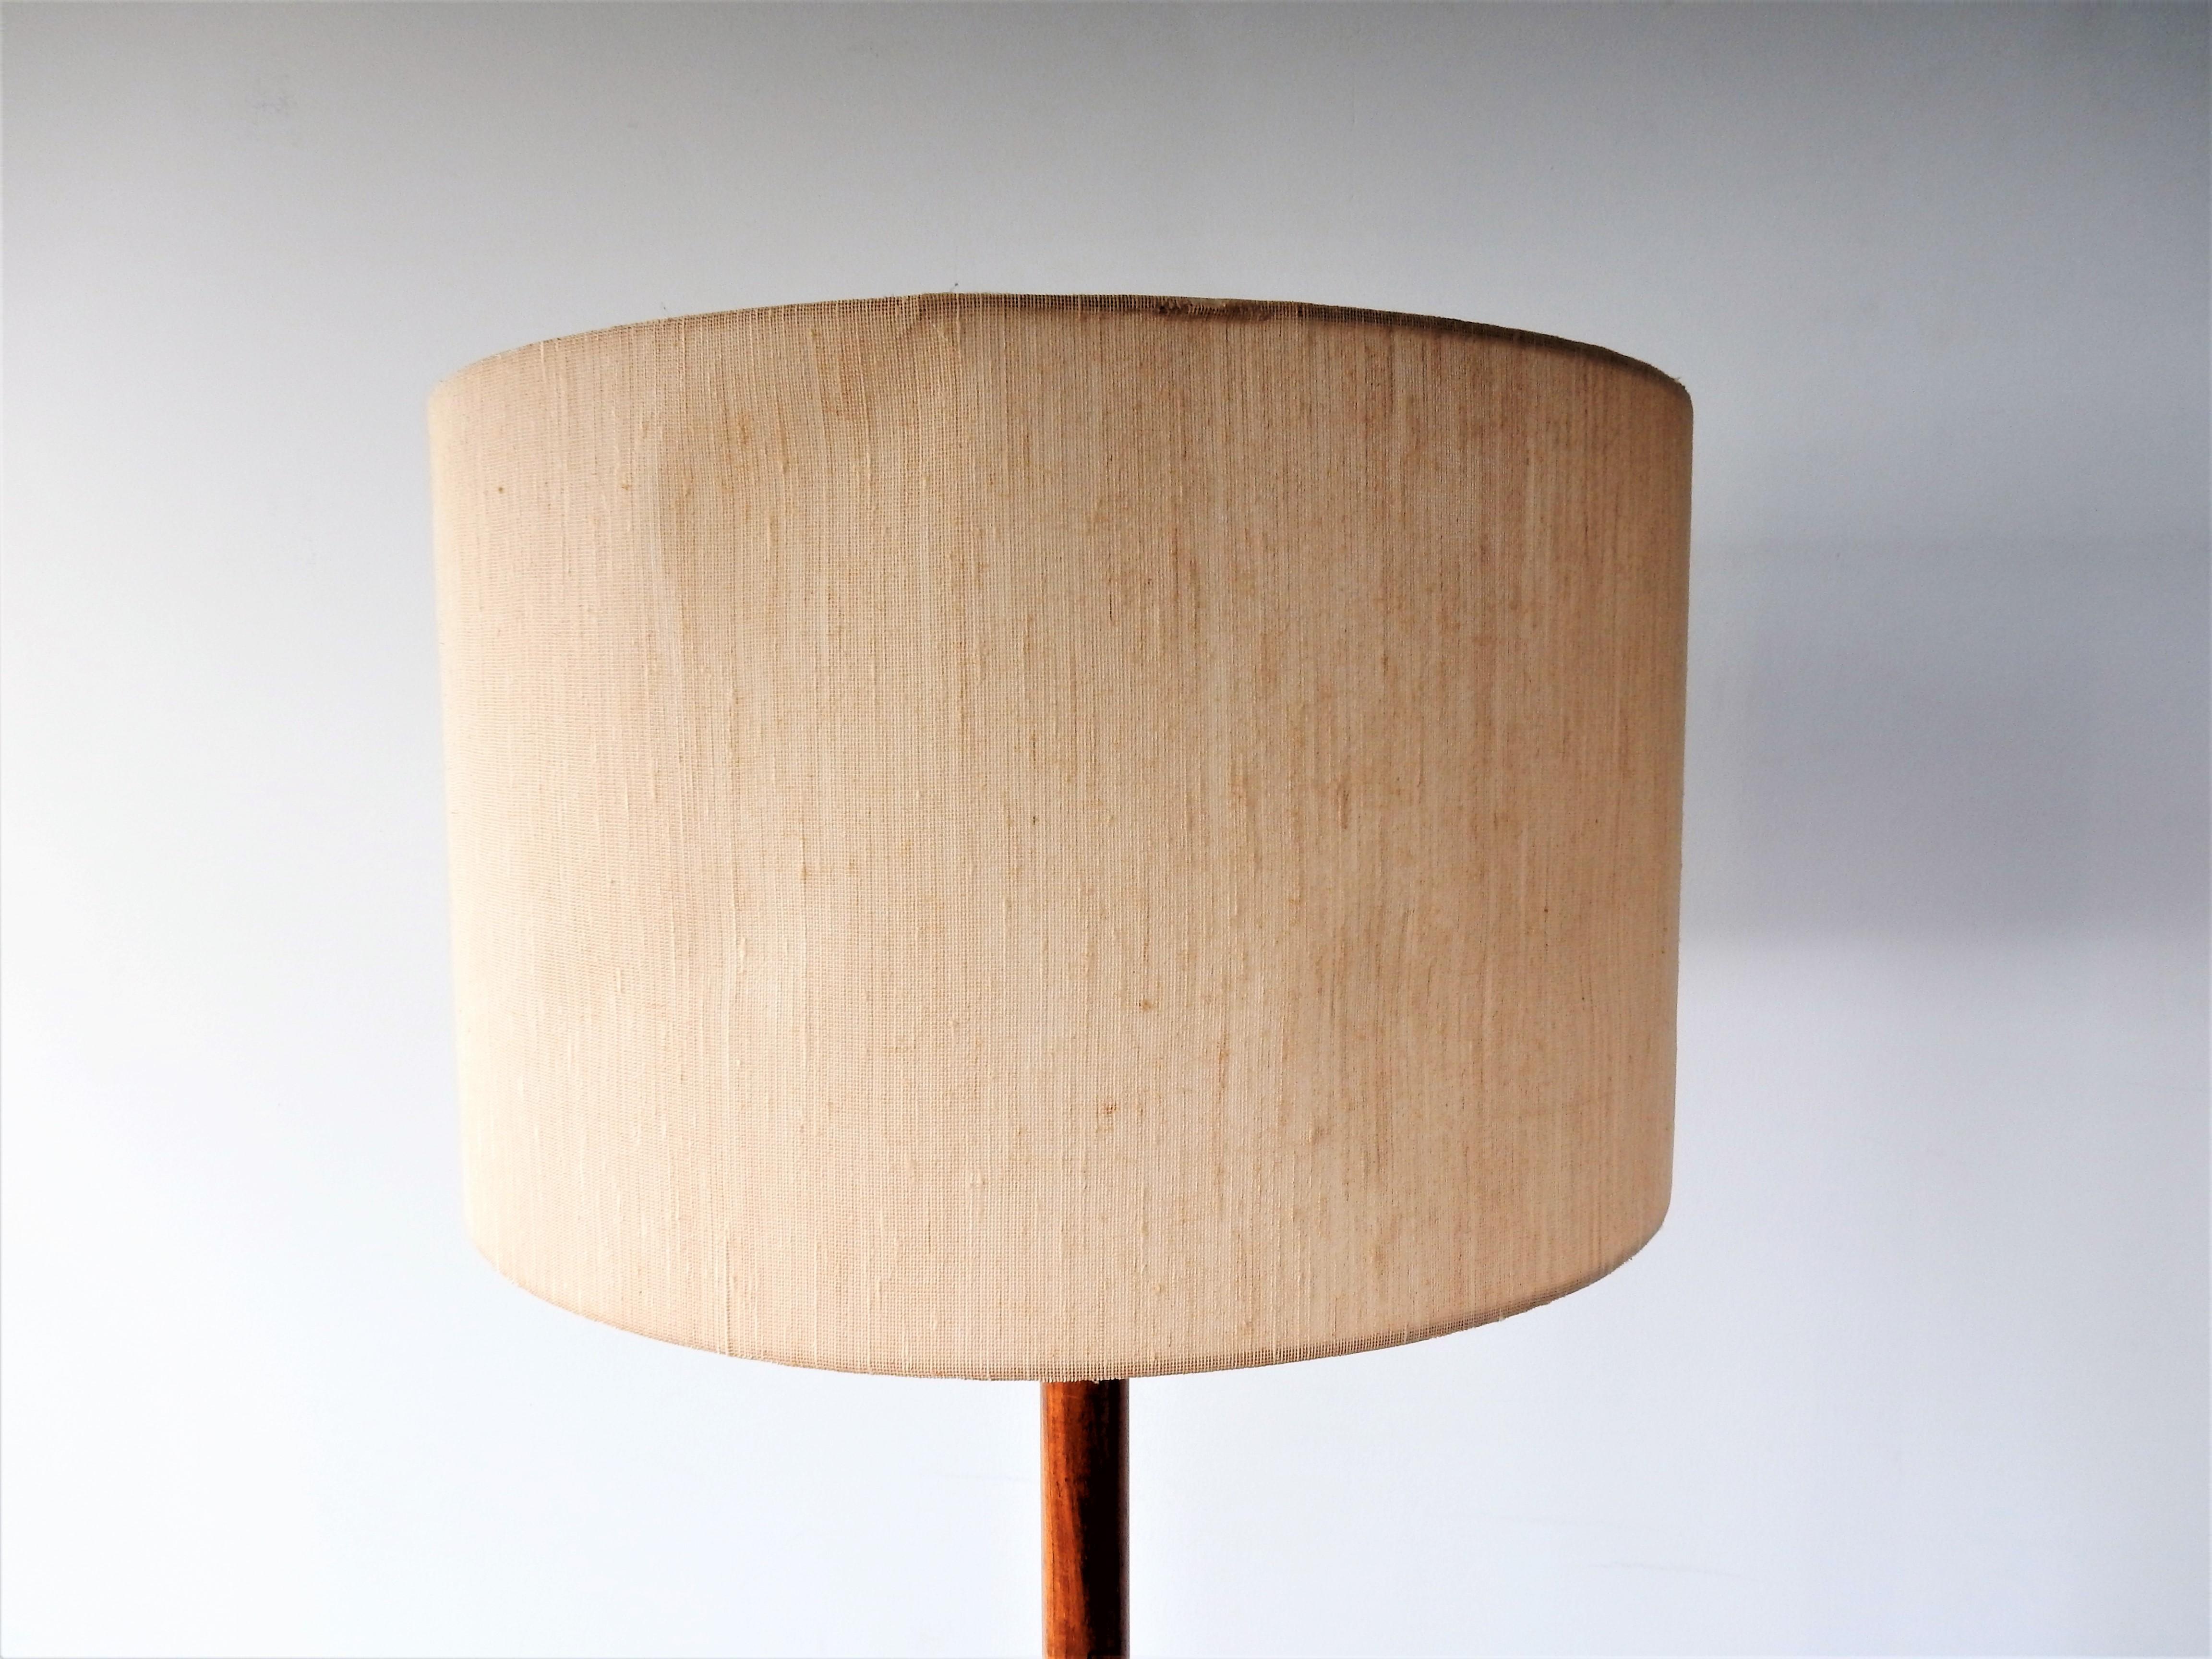 This elegant floor lamp was designed by Willem Hagoort for Hagoort Lamps in the 1960's. A lamp not often seen. It has a rosewood and metal tripod base with the original fabric shade. The shade does have a dent with a small crack to the inside, one